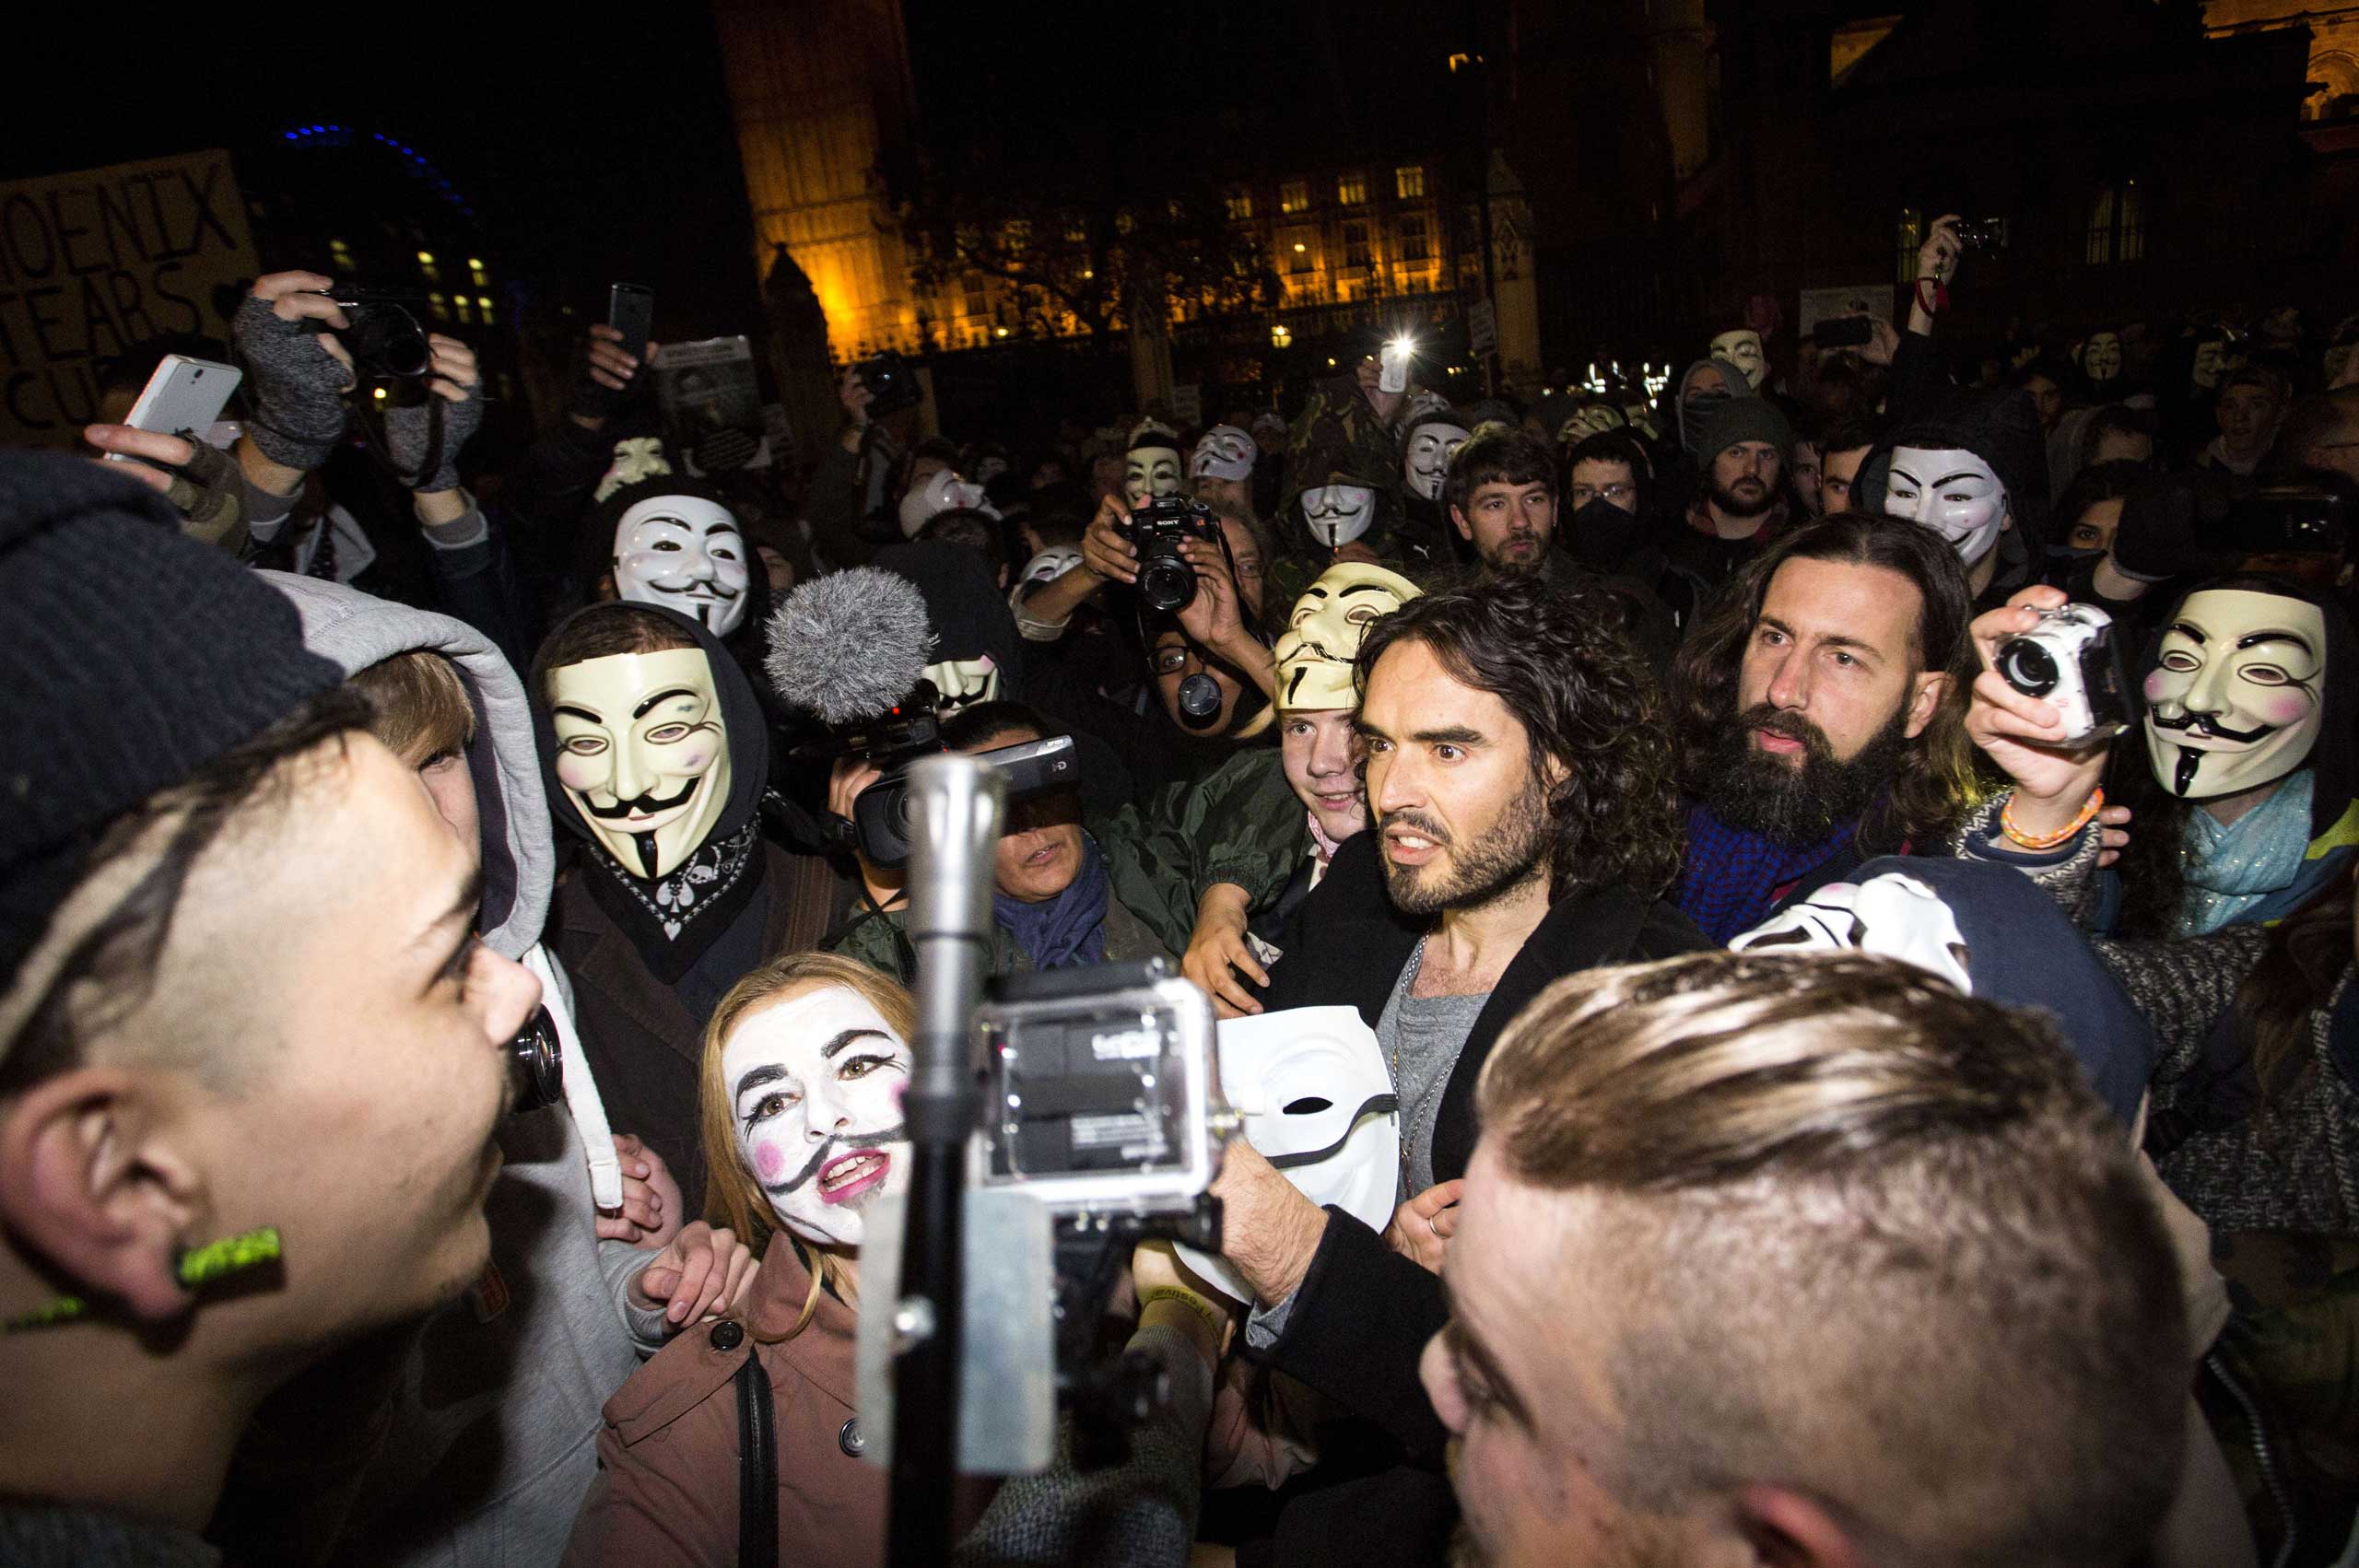 British comedian Russell Brand joins anti-capitalist protesters during the "Million Masks March" in London on Nov. 5, 2014. (Jack Taylor—AFP/Getty Images)